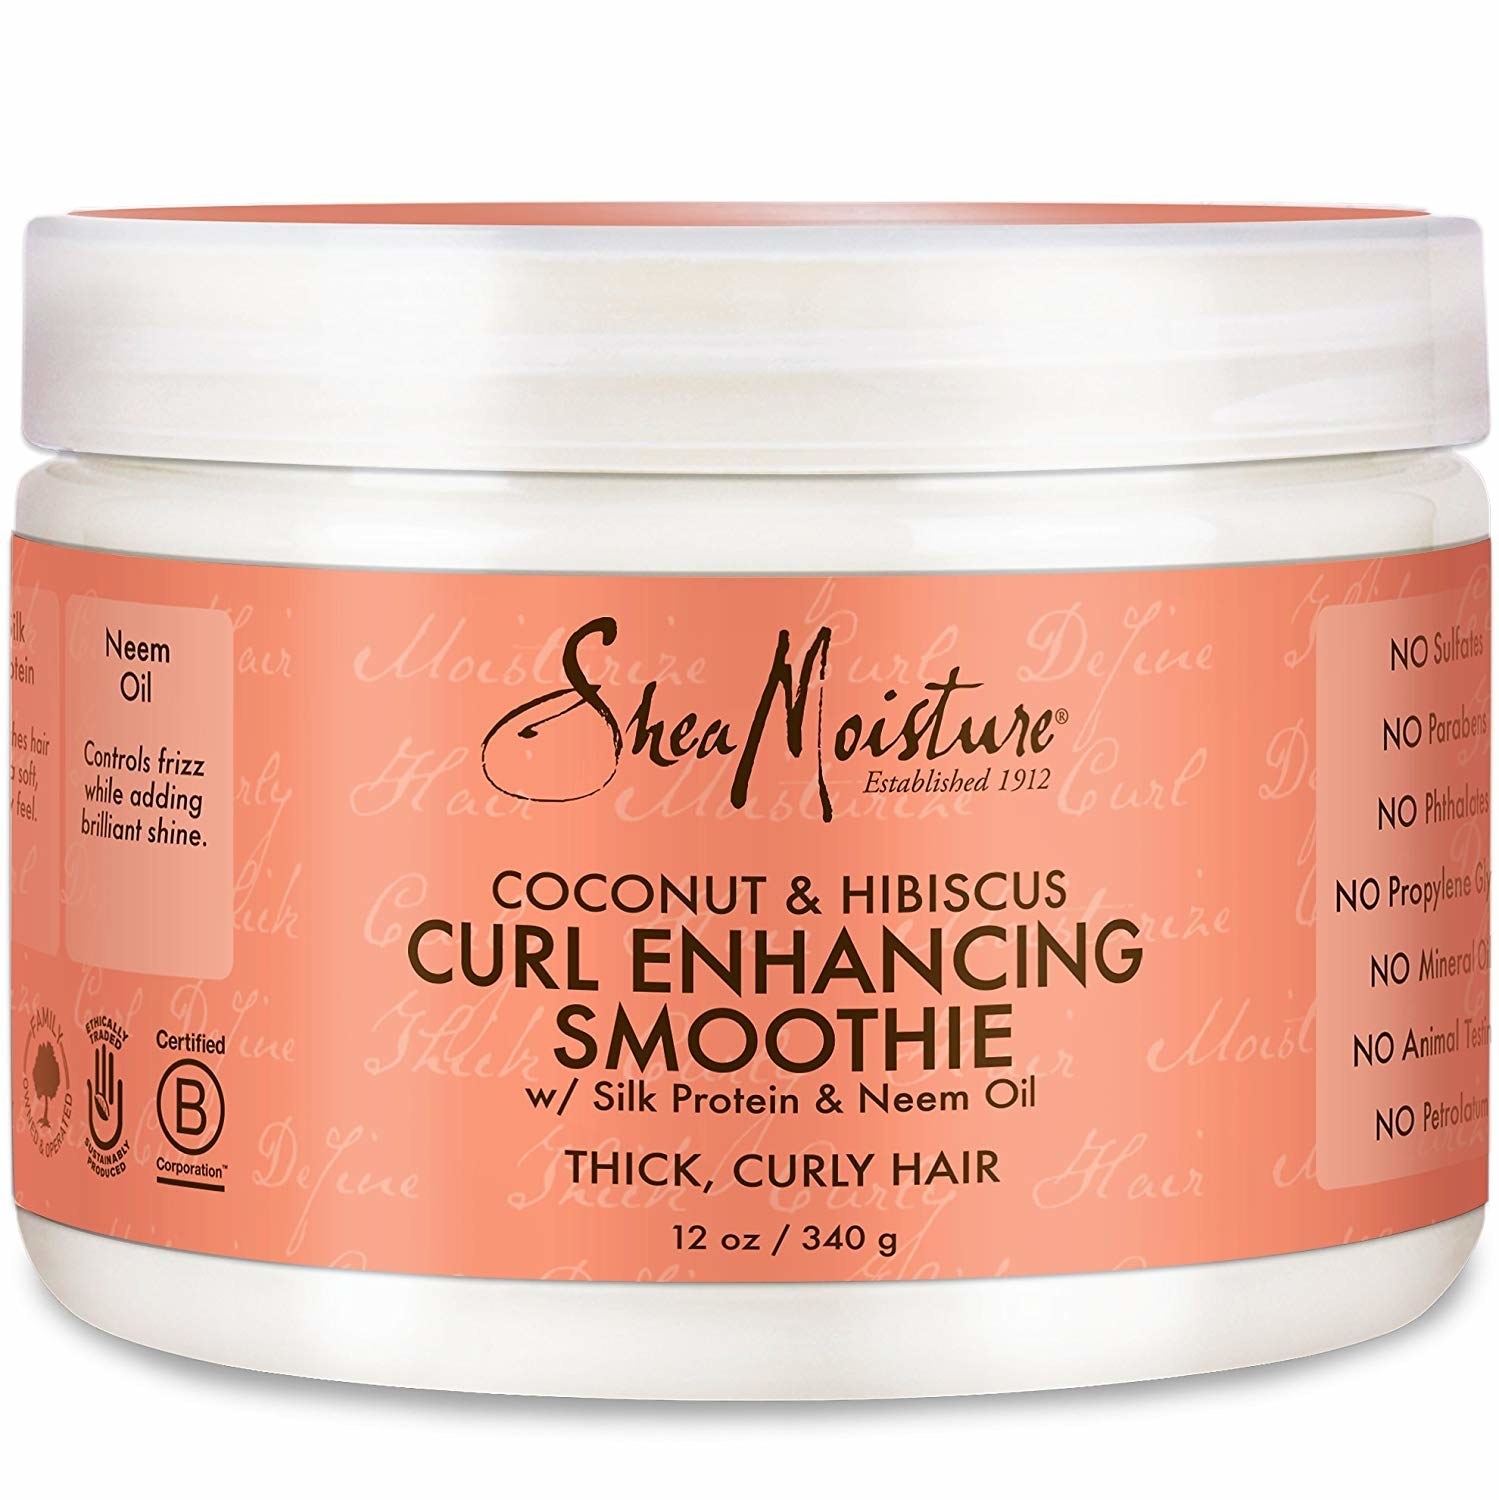 how to use curl enhancing smoothie for waves